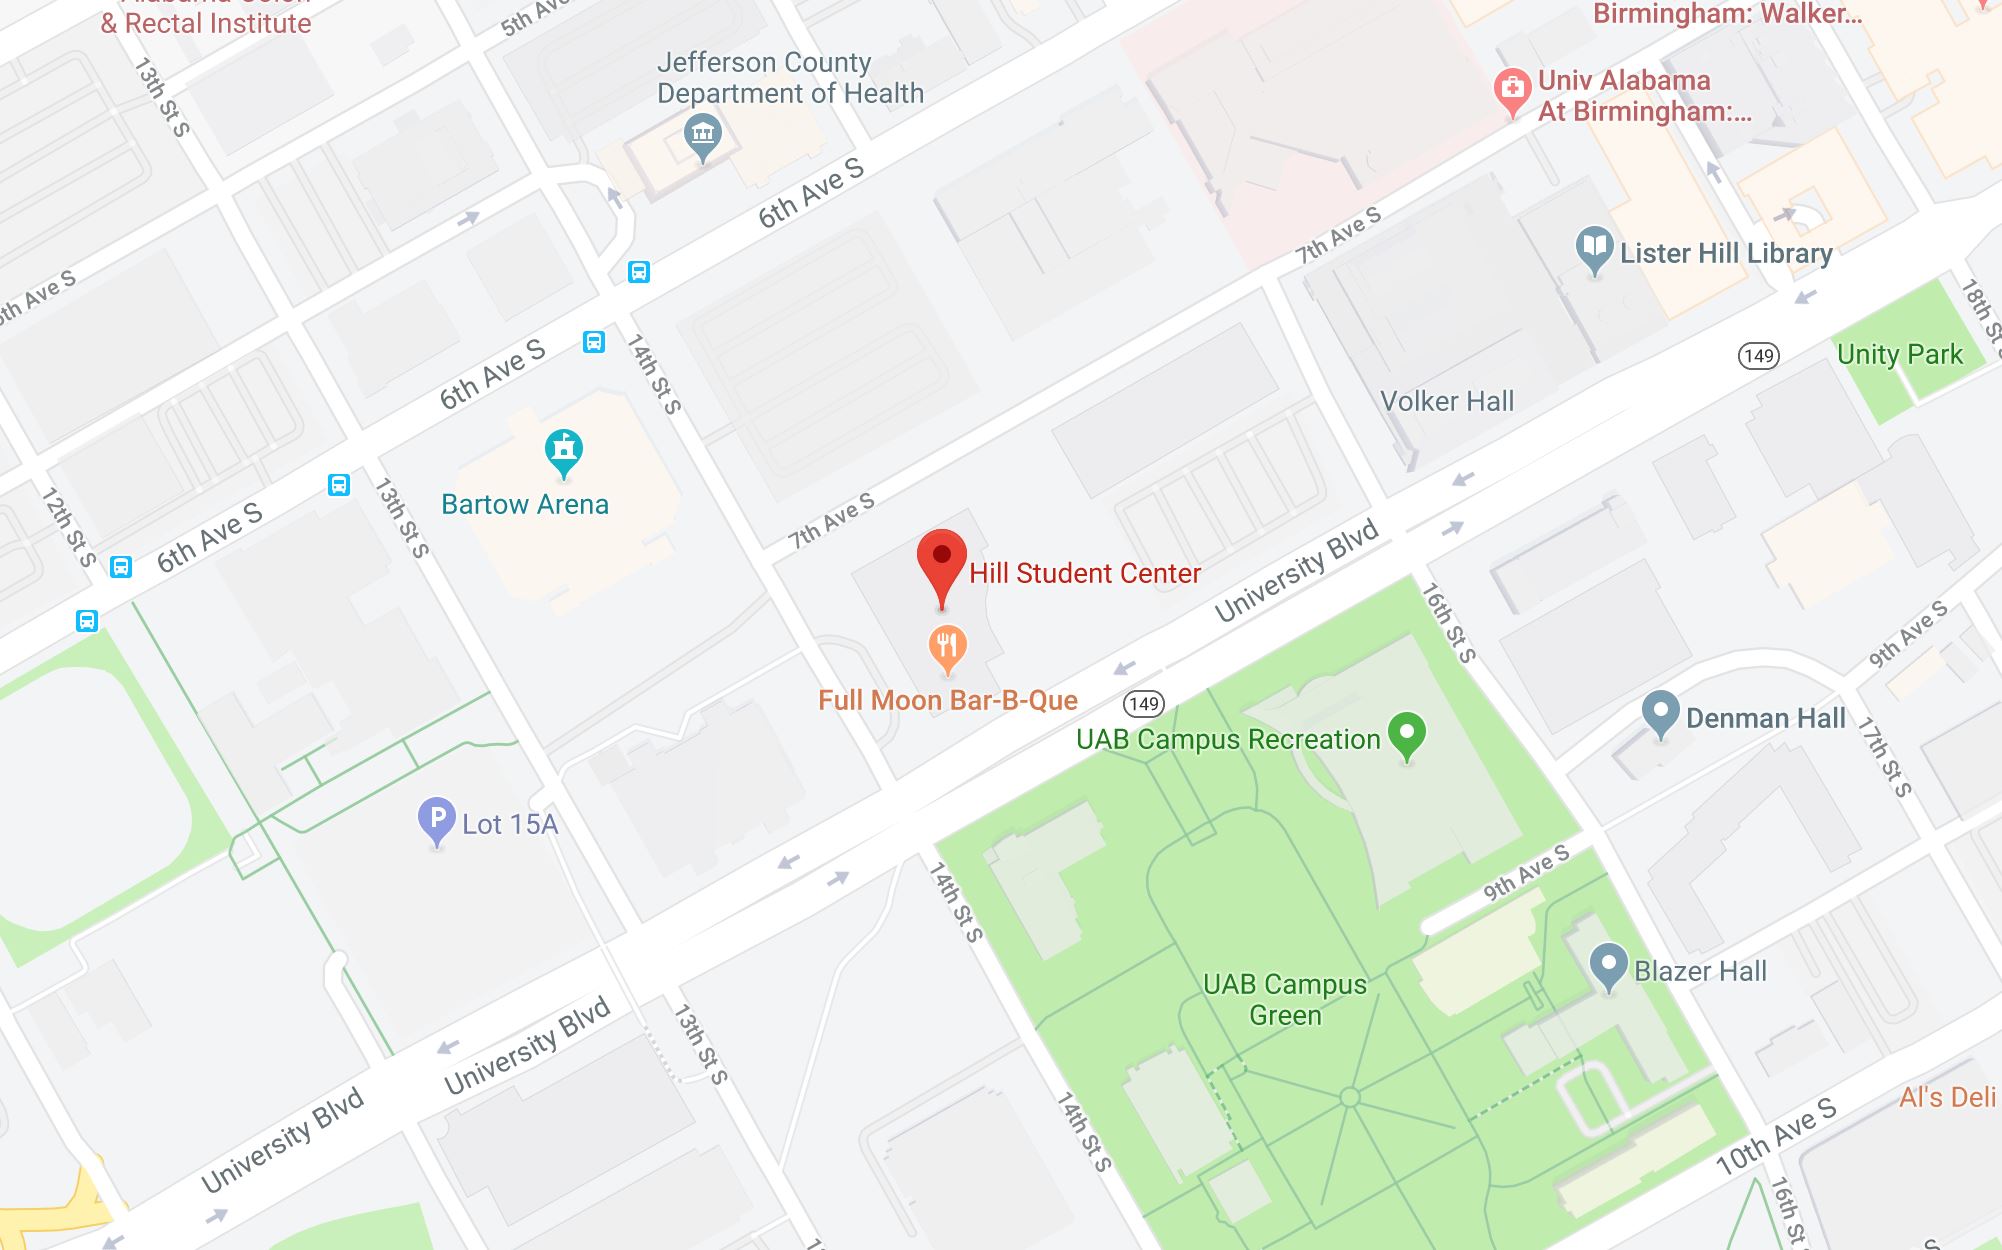 Location of Hill center on Google Maps